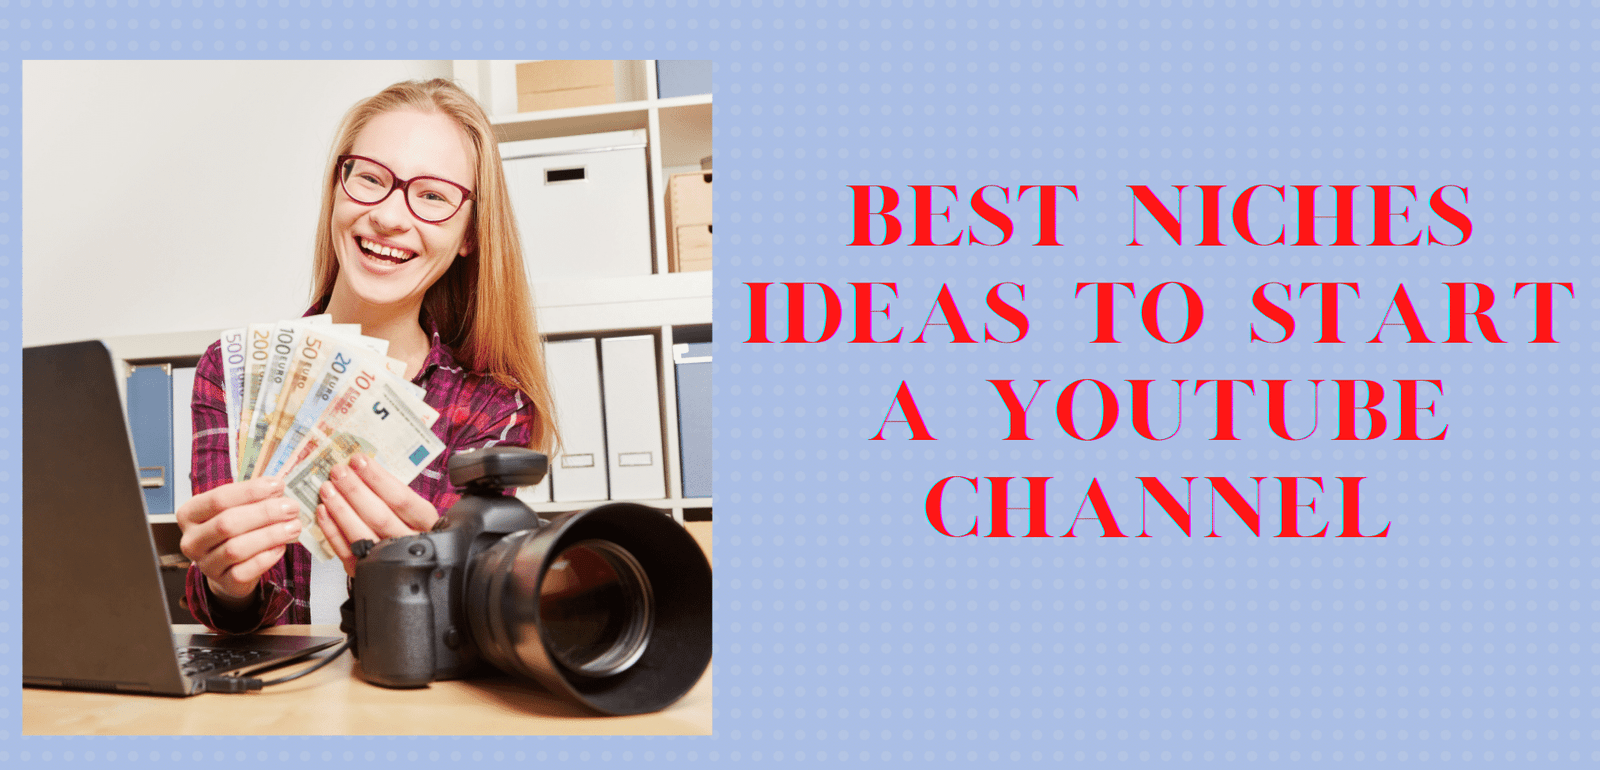 12 BEST NICHES IDEAS TO START A YOUTUBE CHANNEL IN 2021